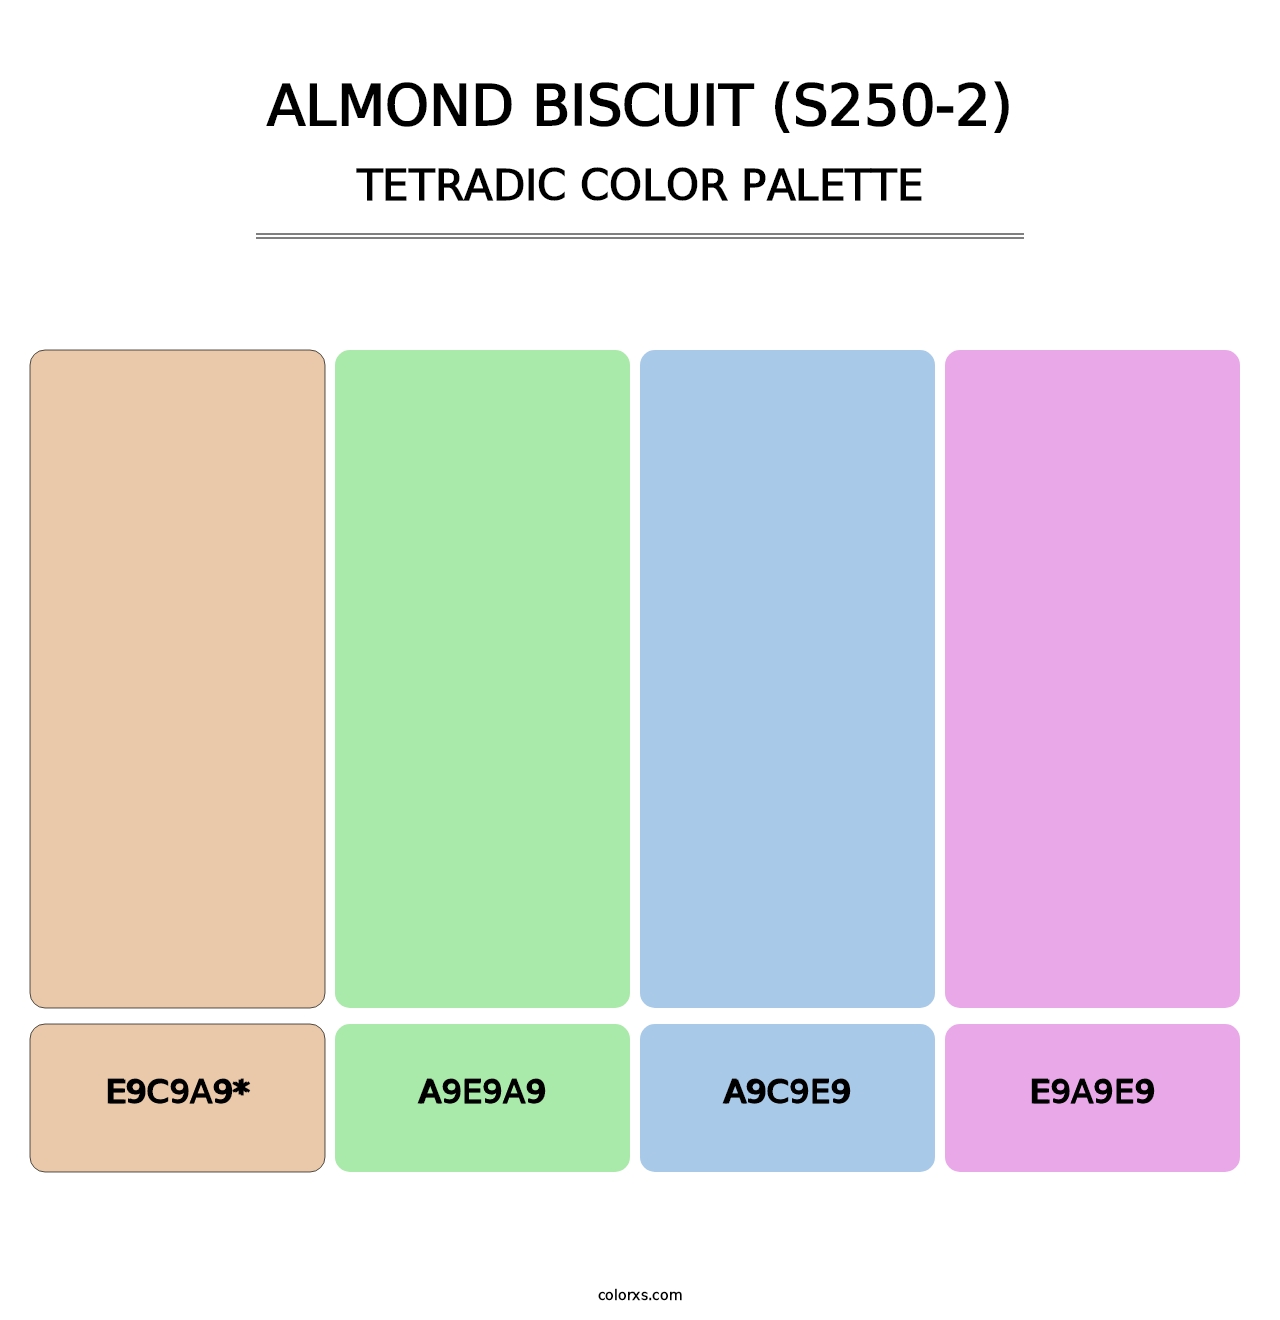 Almond Biscuit (S250-2) - Tetradic Color Palette